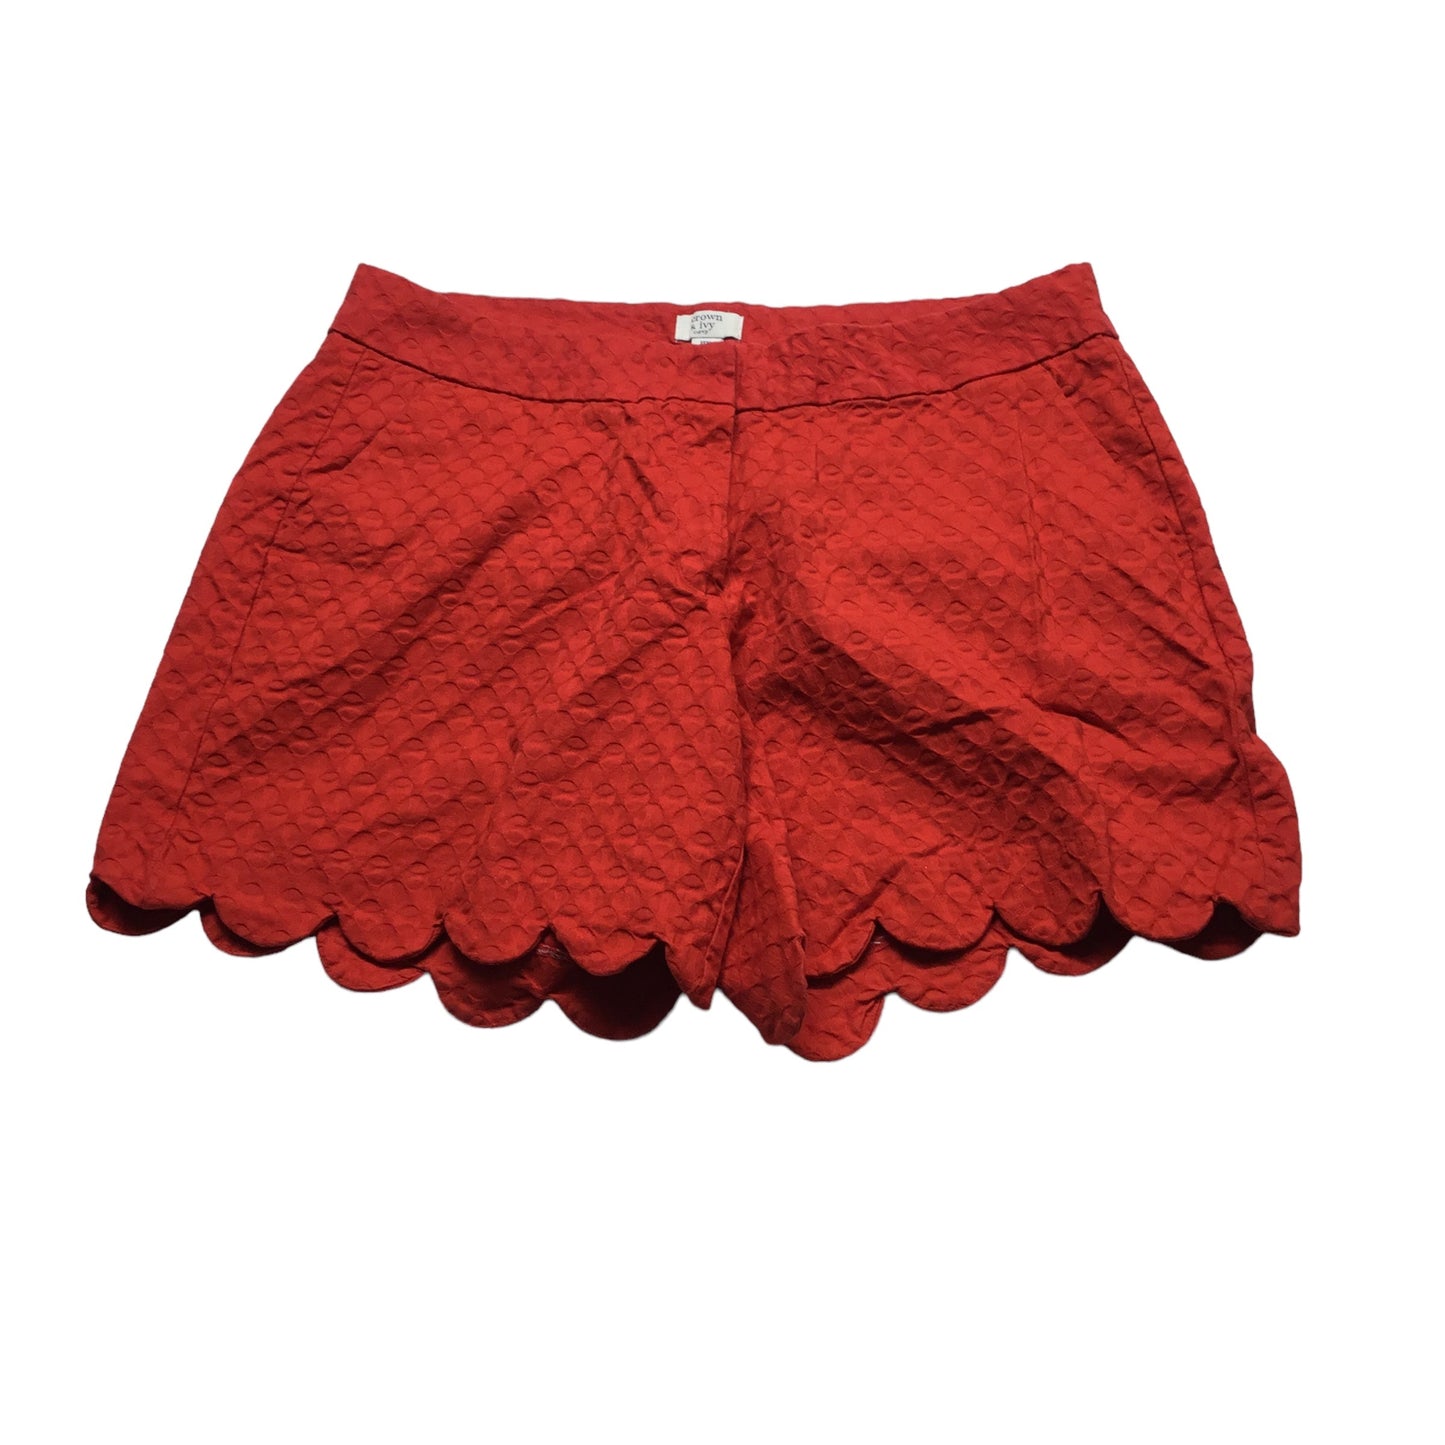 Shorts By Crown And Ivy  Size: 14